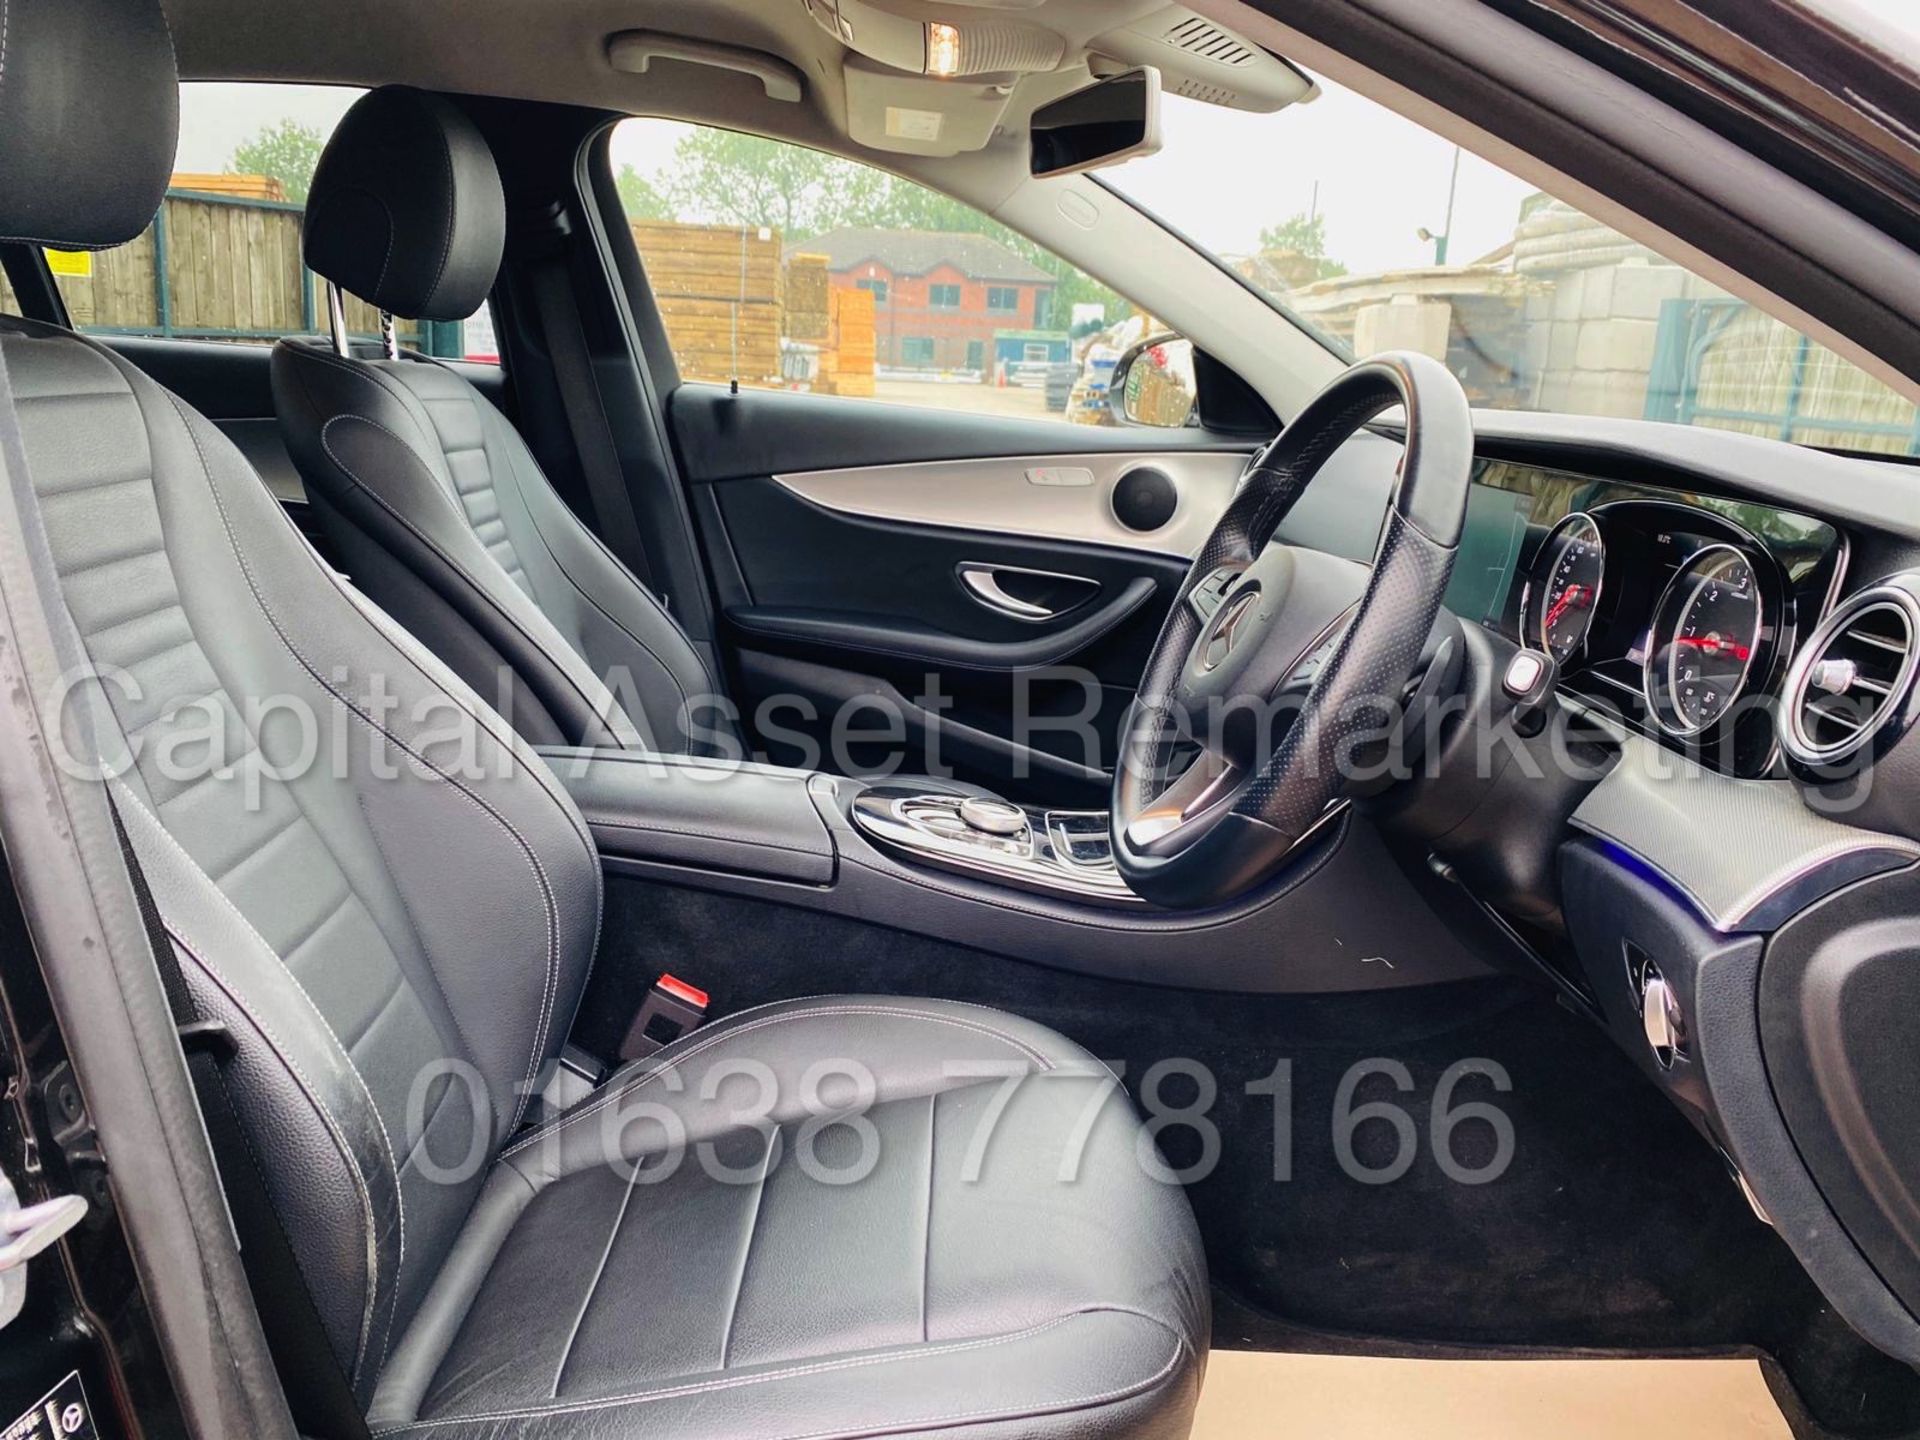 (On Sale) MERCEDES-BENZ E220D *SALOON* (2018 - NEW MODEL) '9-G TRONIC AUTO - LEATHER - SAT NAV' - Image 36 of 52